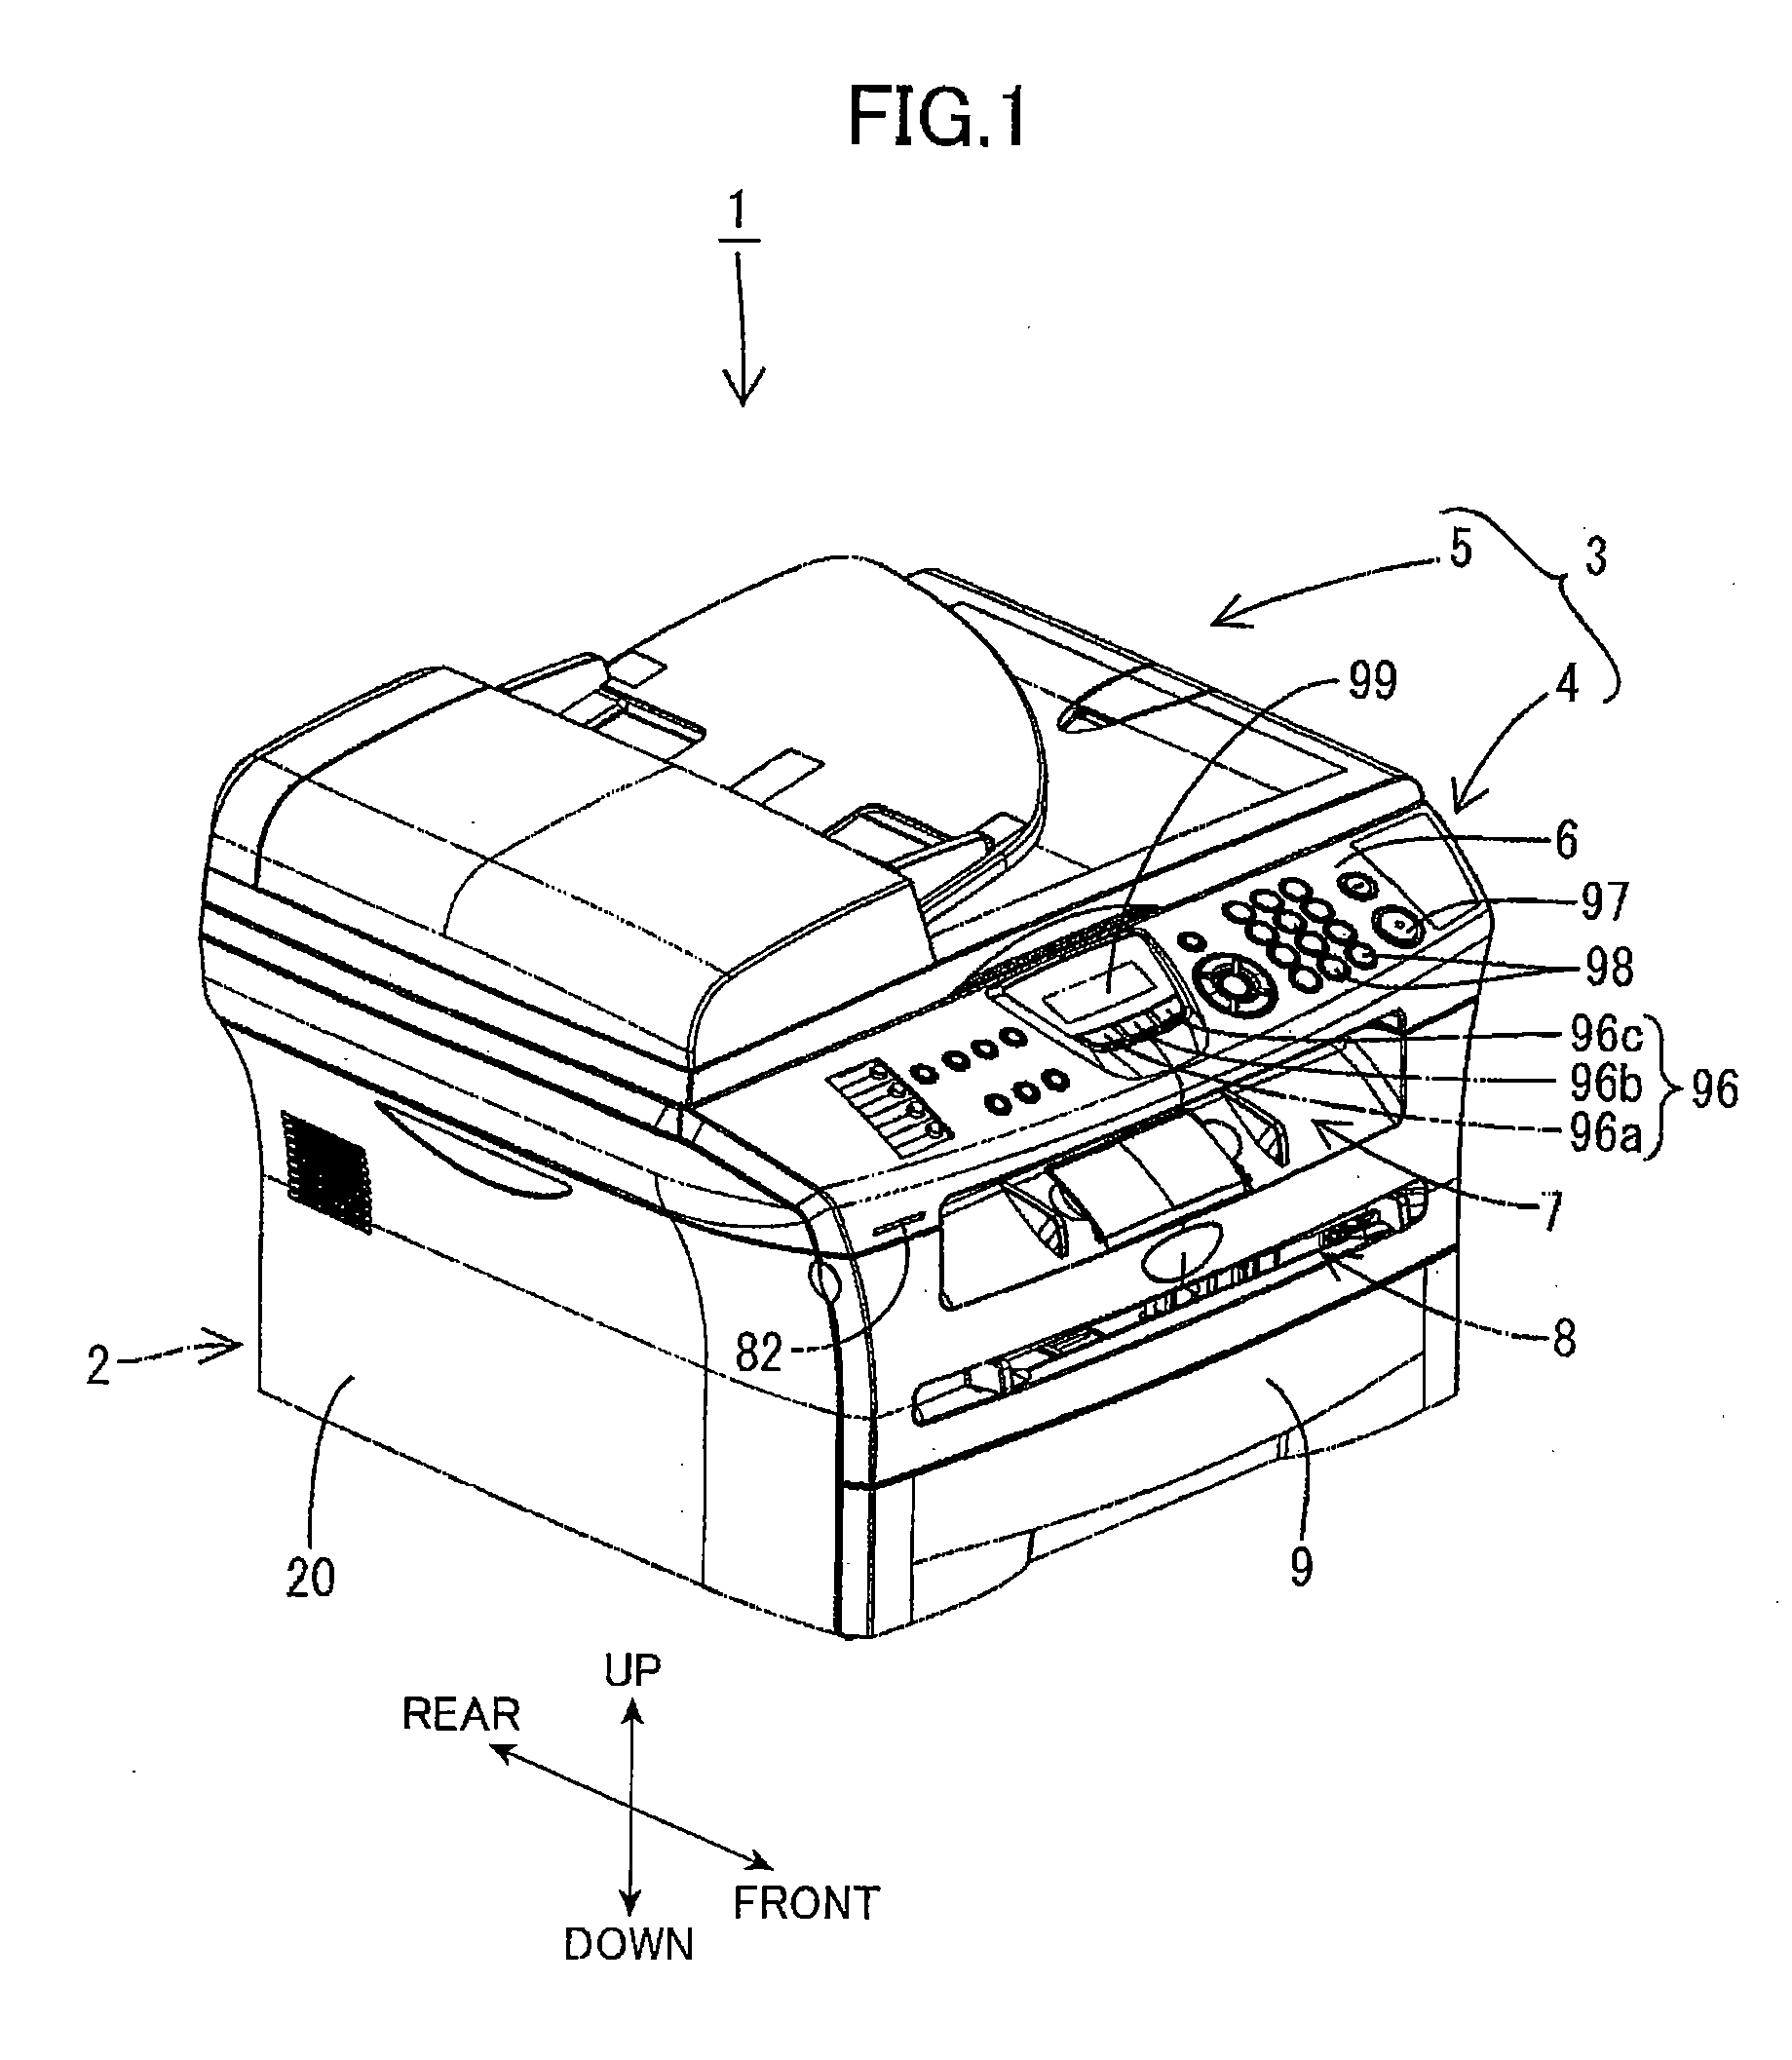 Image-Processing Device